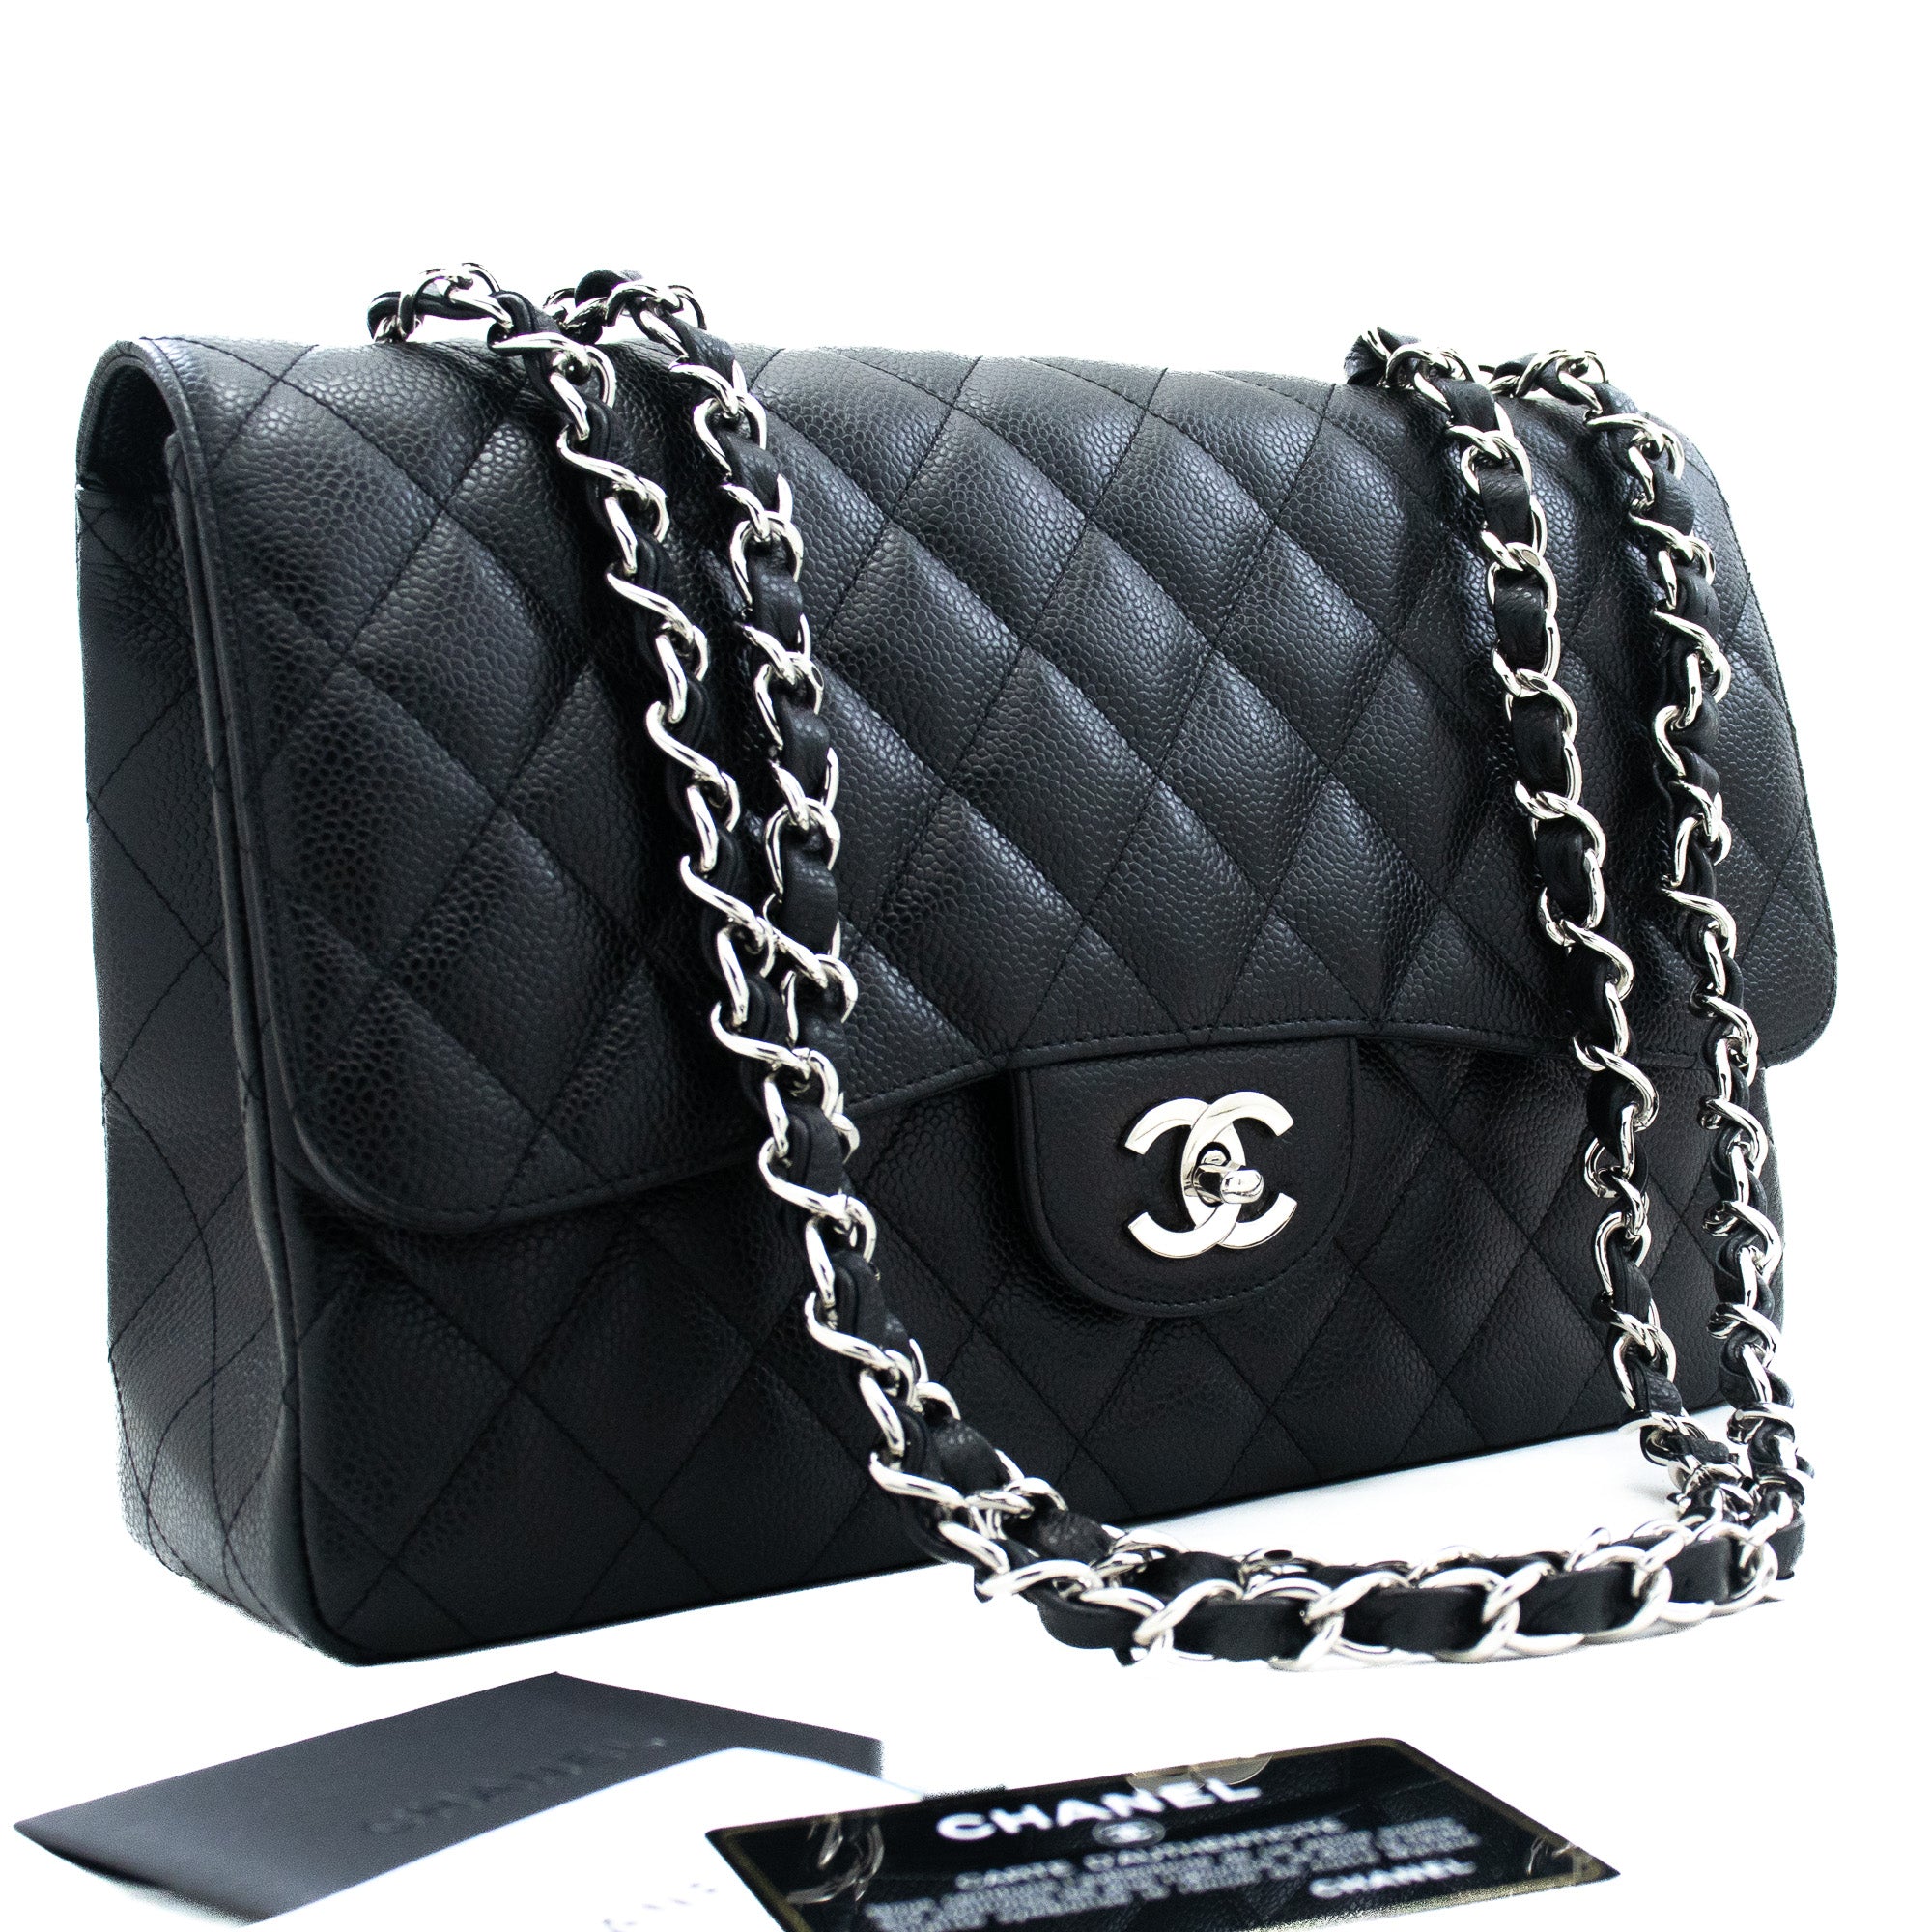 AUTHENTIC CHANEL GRAINED LARGE DOUBLE FLAP